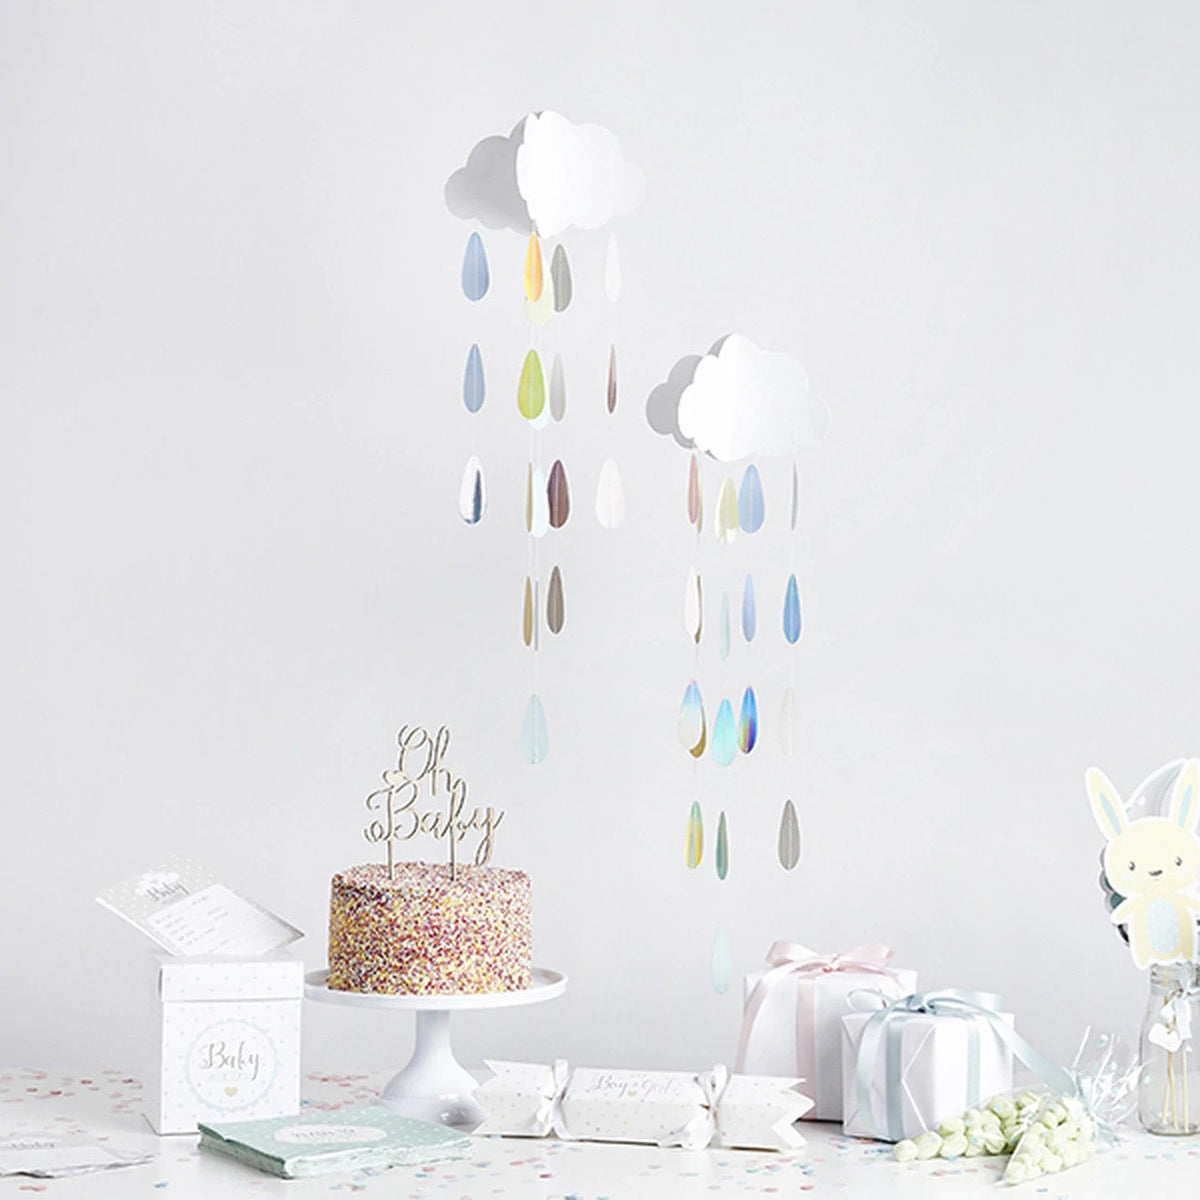 Hanging Clouds & Droplets Baby Shower decorations – Silverlight